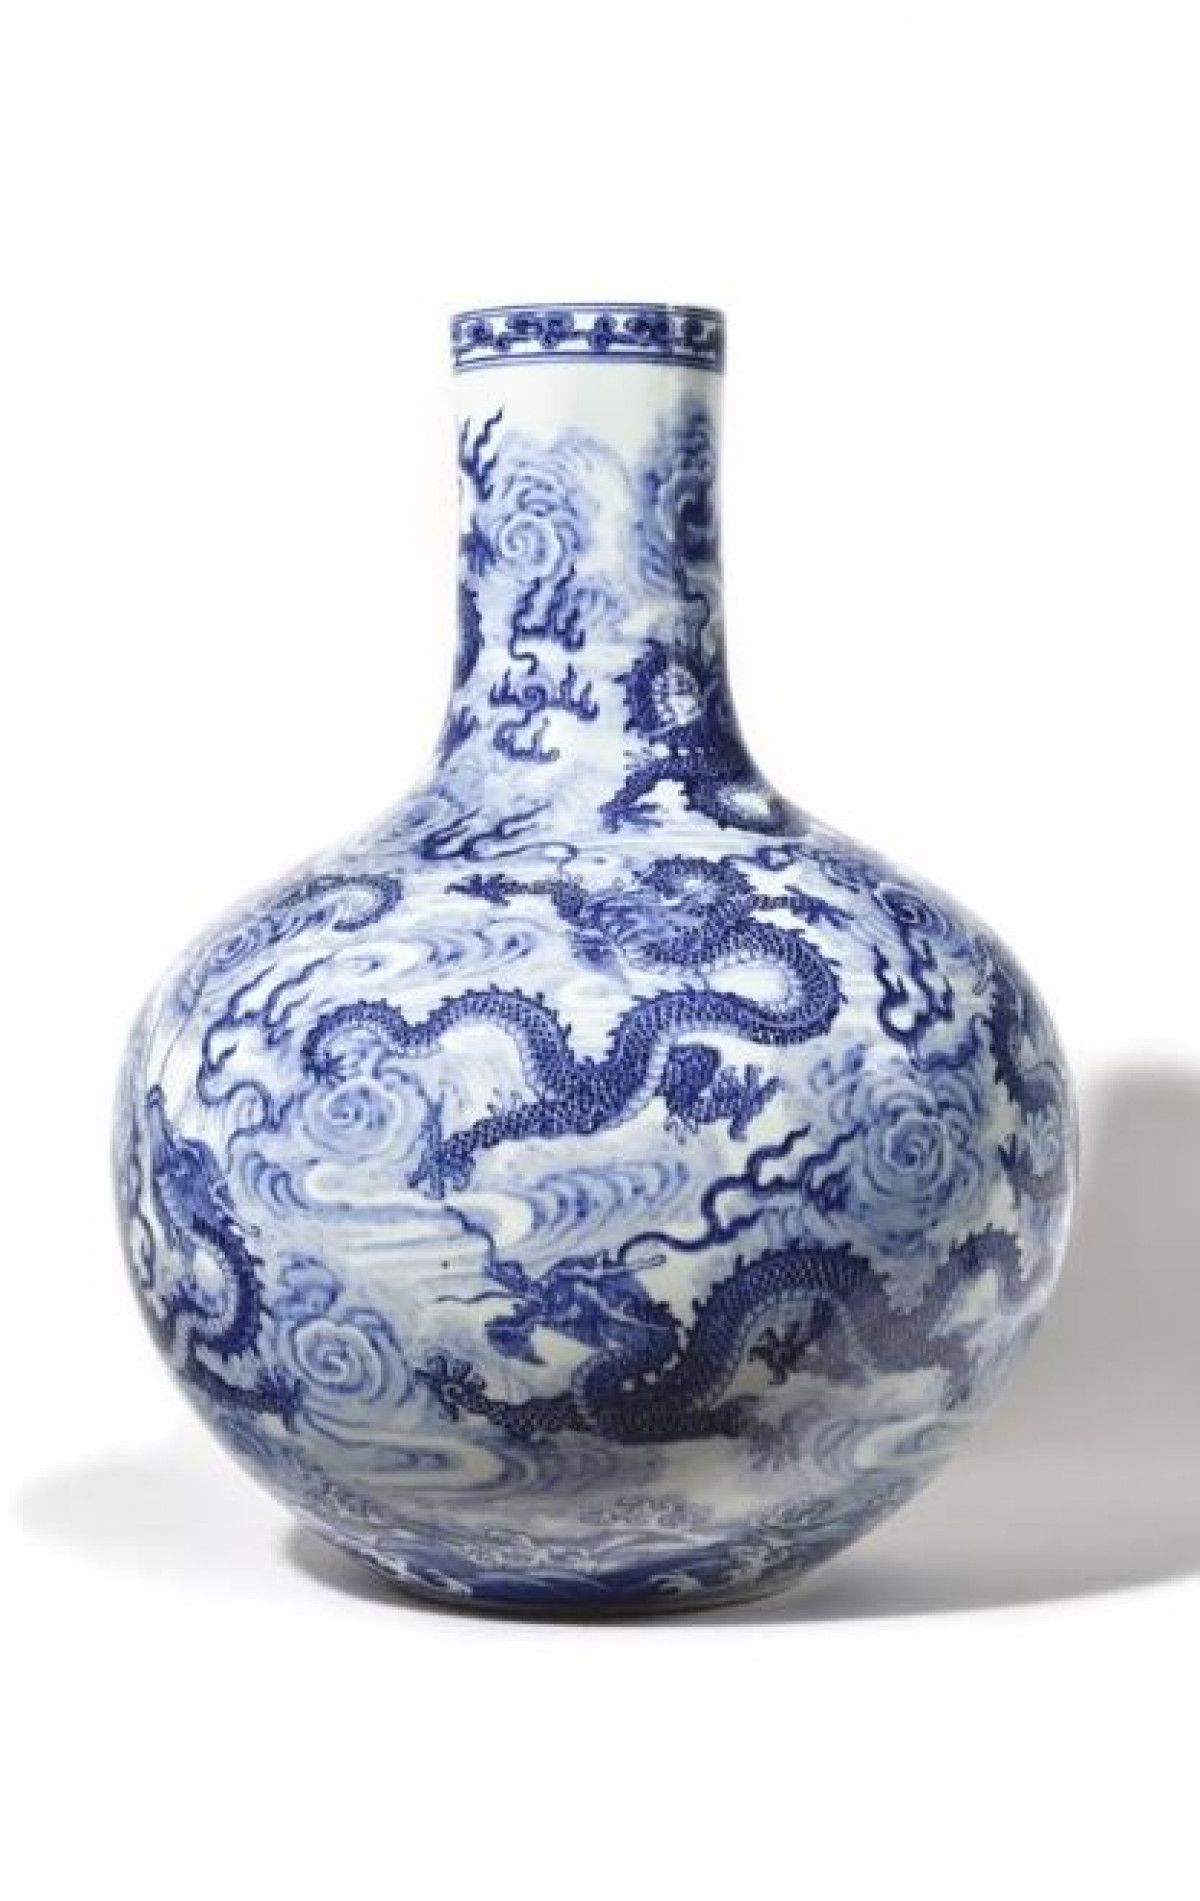 Chinese vase sold at auction in France for 7.7 million euros #1